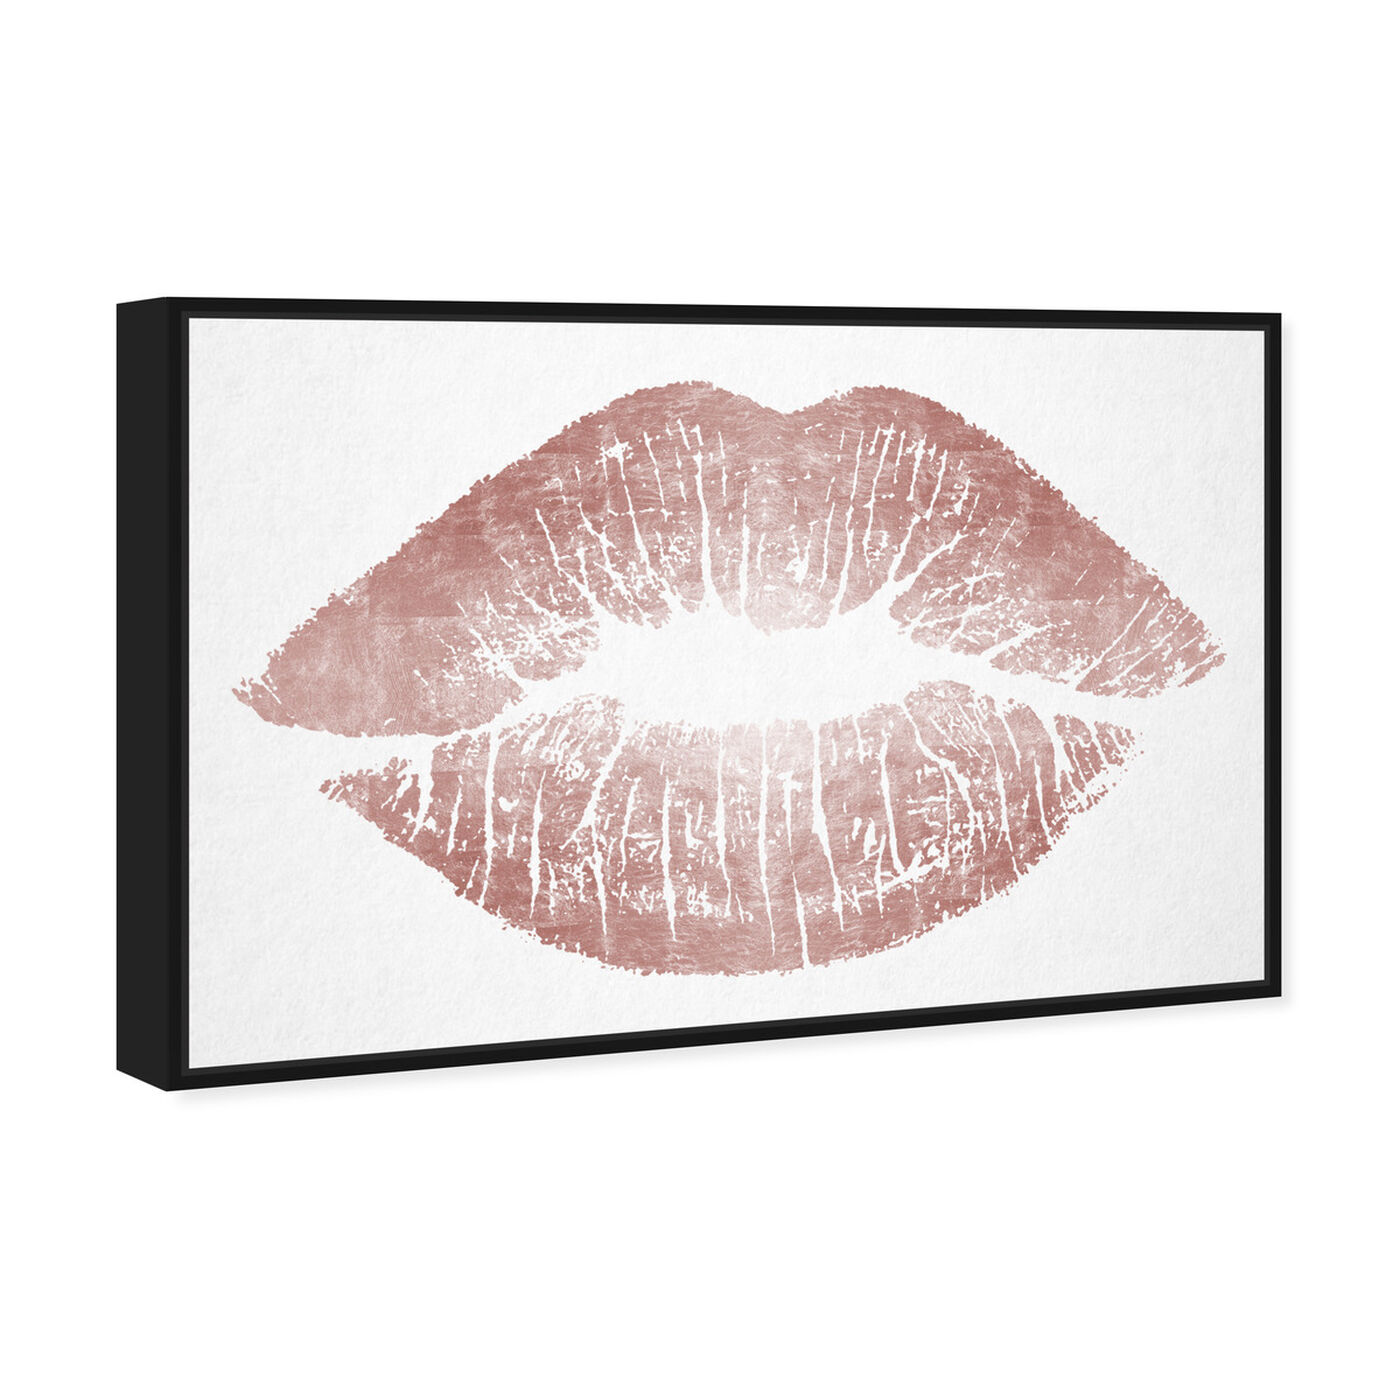 The Oliver Gal Artist Co. Fashion and Glam Wall Art Canvas Prints 1'  Perfumes Kiss Me Number 1 Home Décor, 20 x 20, White Floating Frame